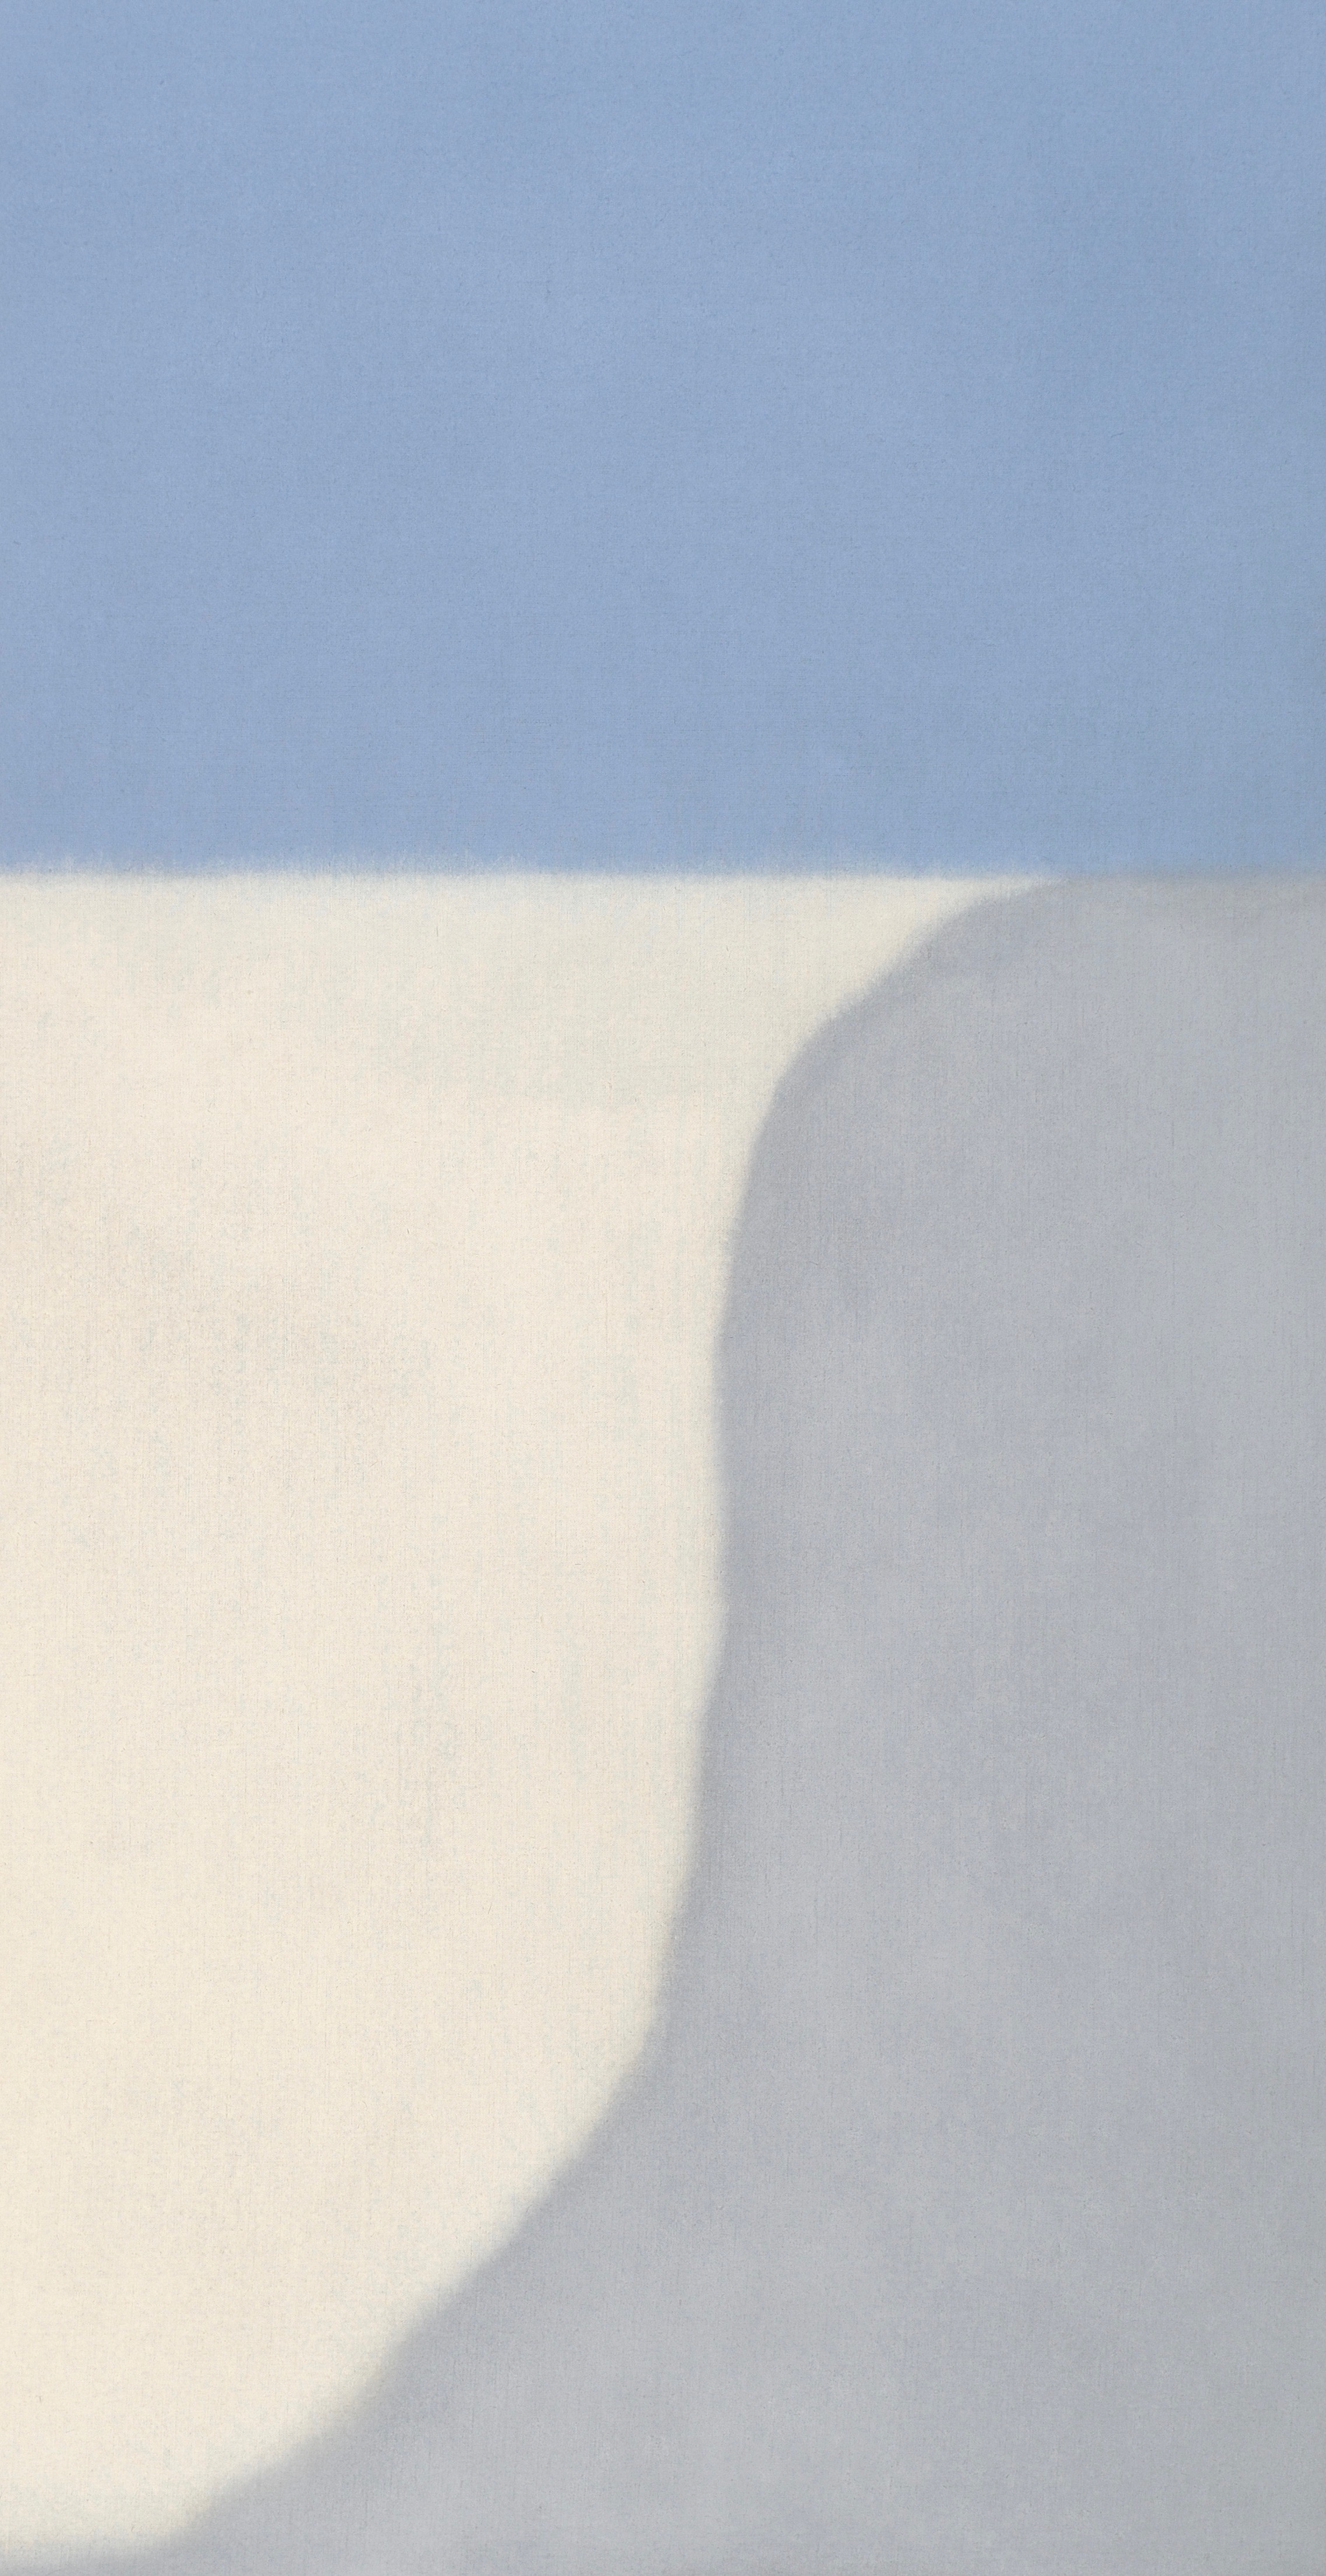  Untitled (Gray/Blue Vertical), 2014. Oil on Linen, 62 x 32 inches. Private Collection. 